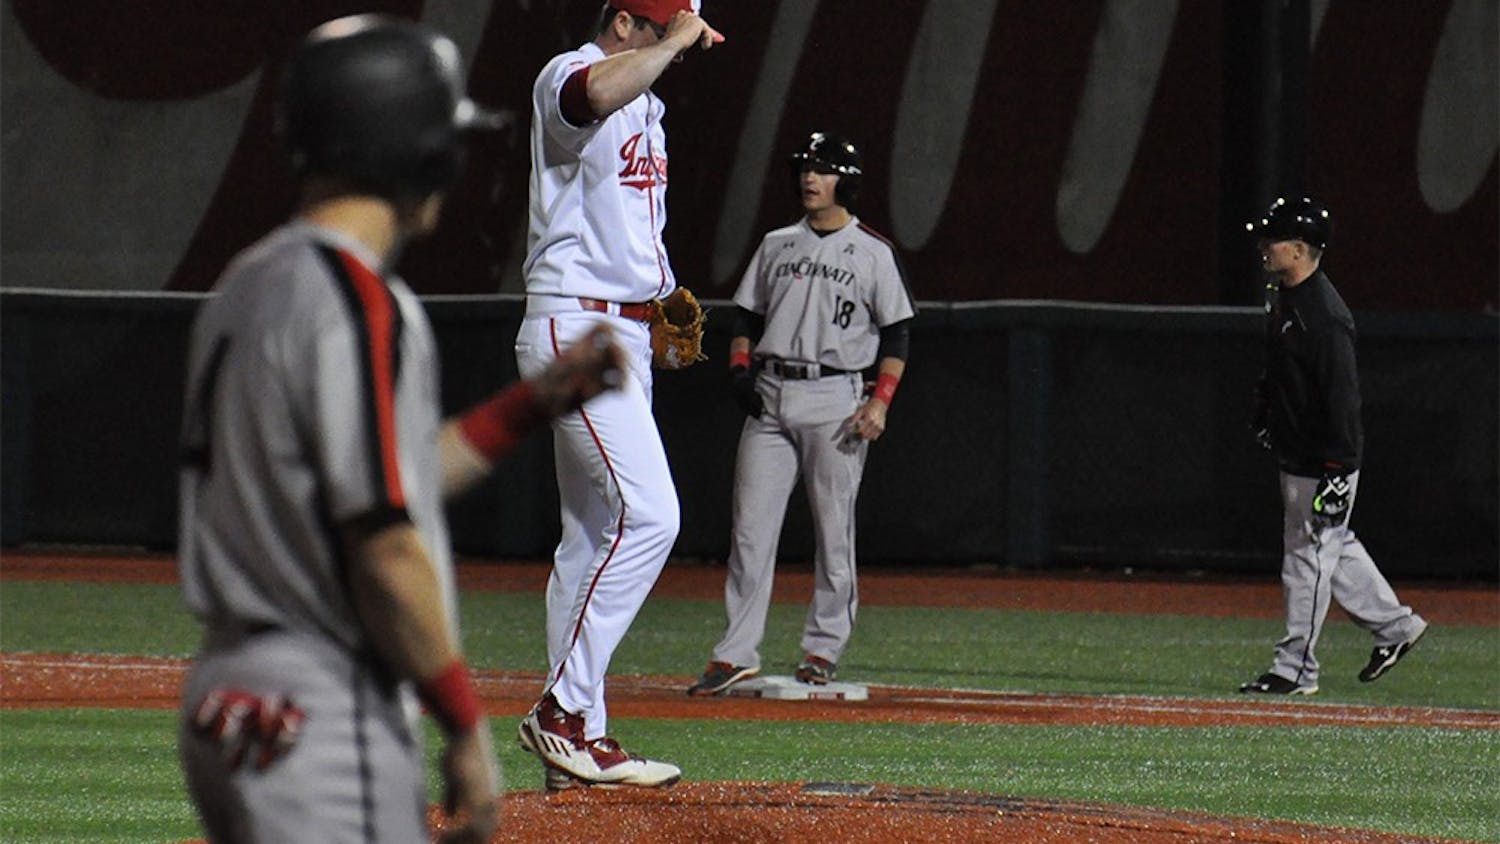 Sophomore pitcher Brian Hobbie takes the mound with bases loaded in the top of the ninth inning on March 29 at Bart Kaufman Field. The Hoosiers escaped the inning without giving up a run but ultimately lost 5-0 to Cincinnati. 